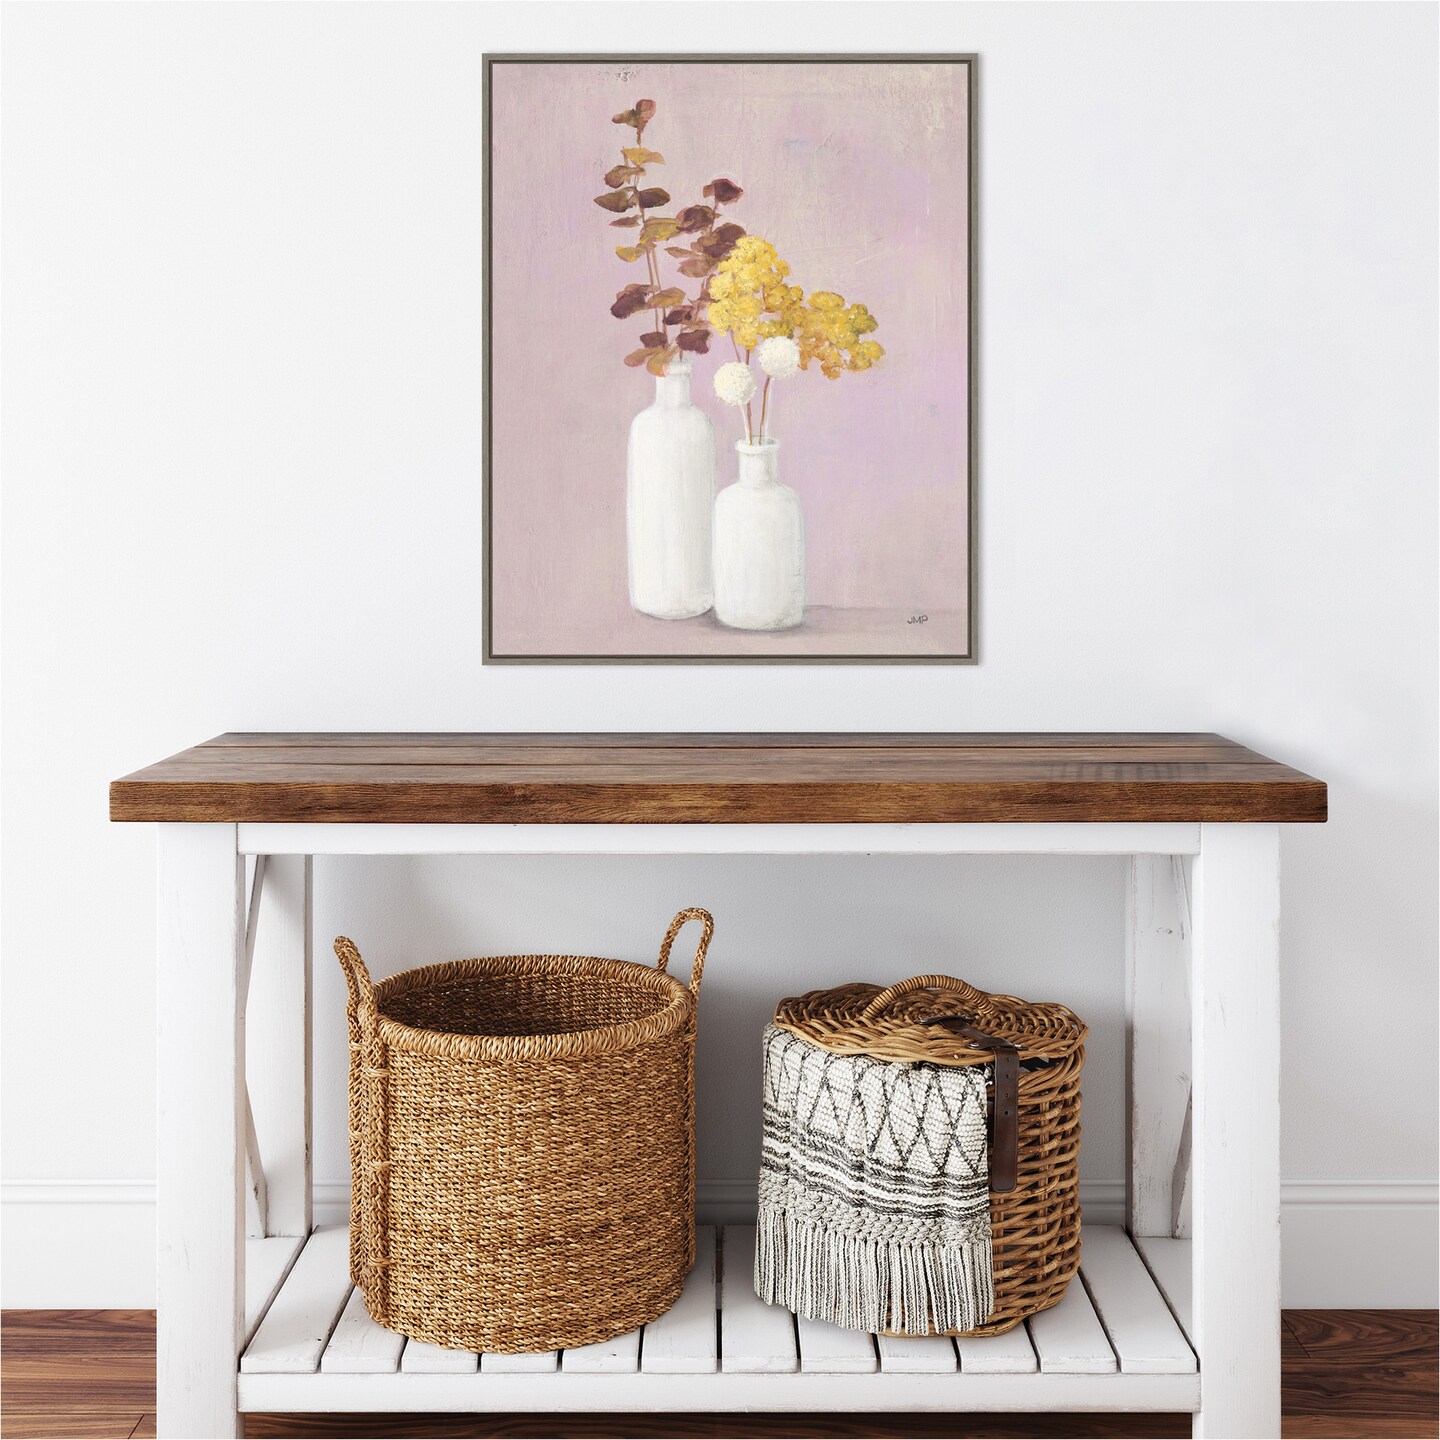 Autumn Greenhouse VI by Julia Purinton 23-in. W x 28-in. H. Canvas Wall Art Print Framed in Grey